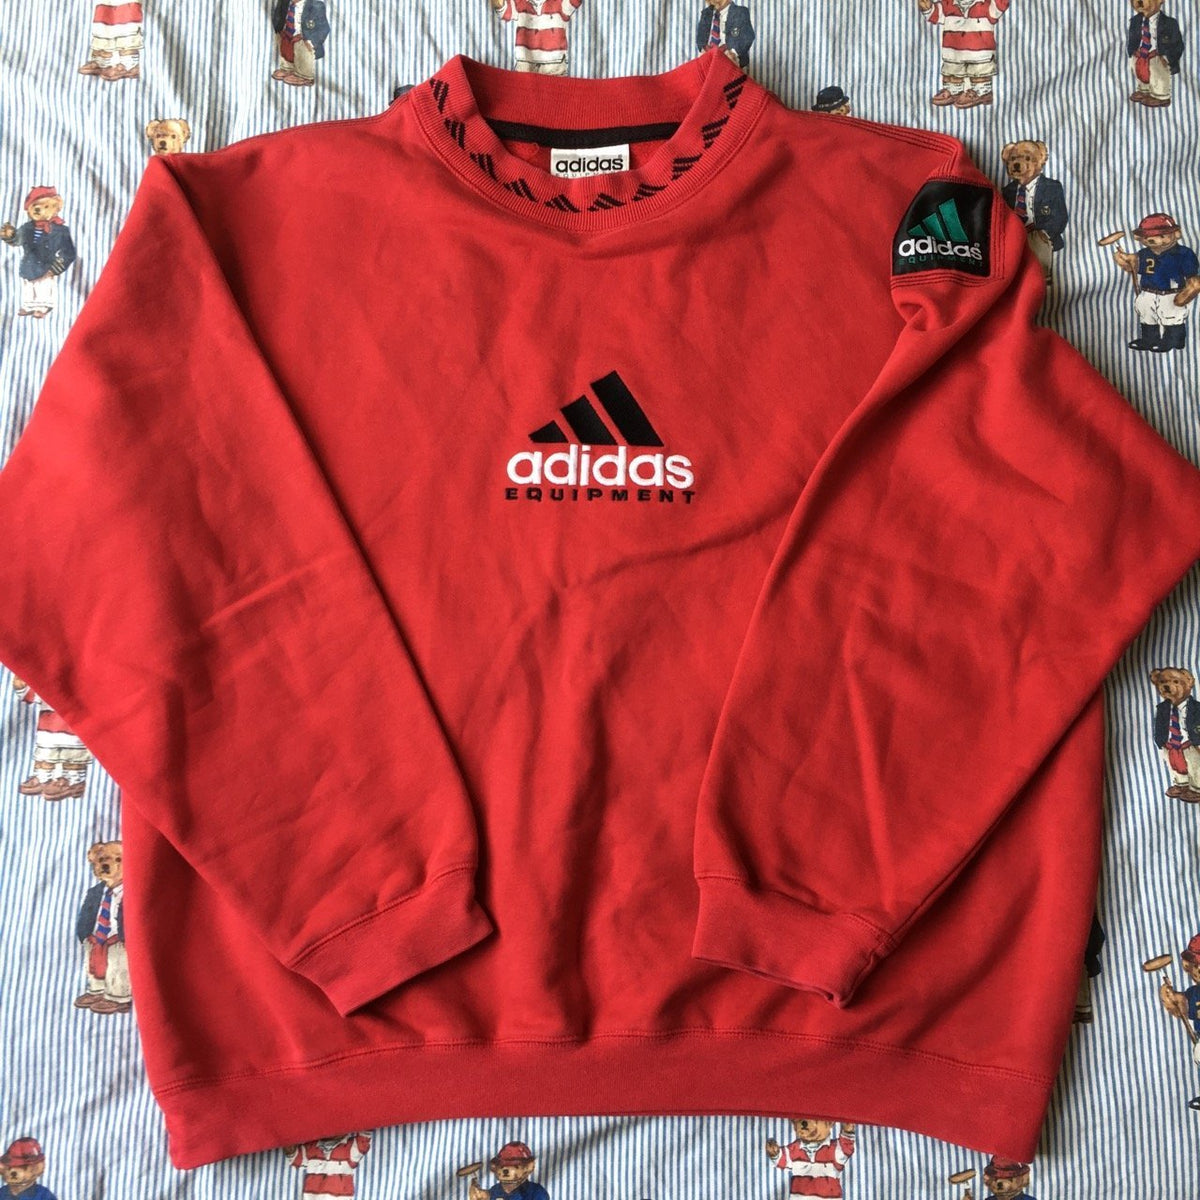 adidas red sweater